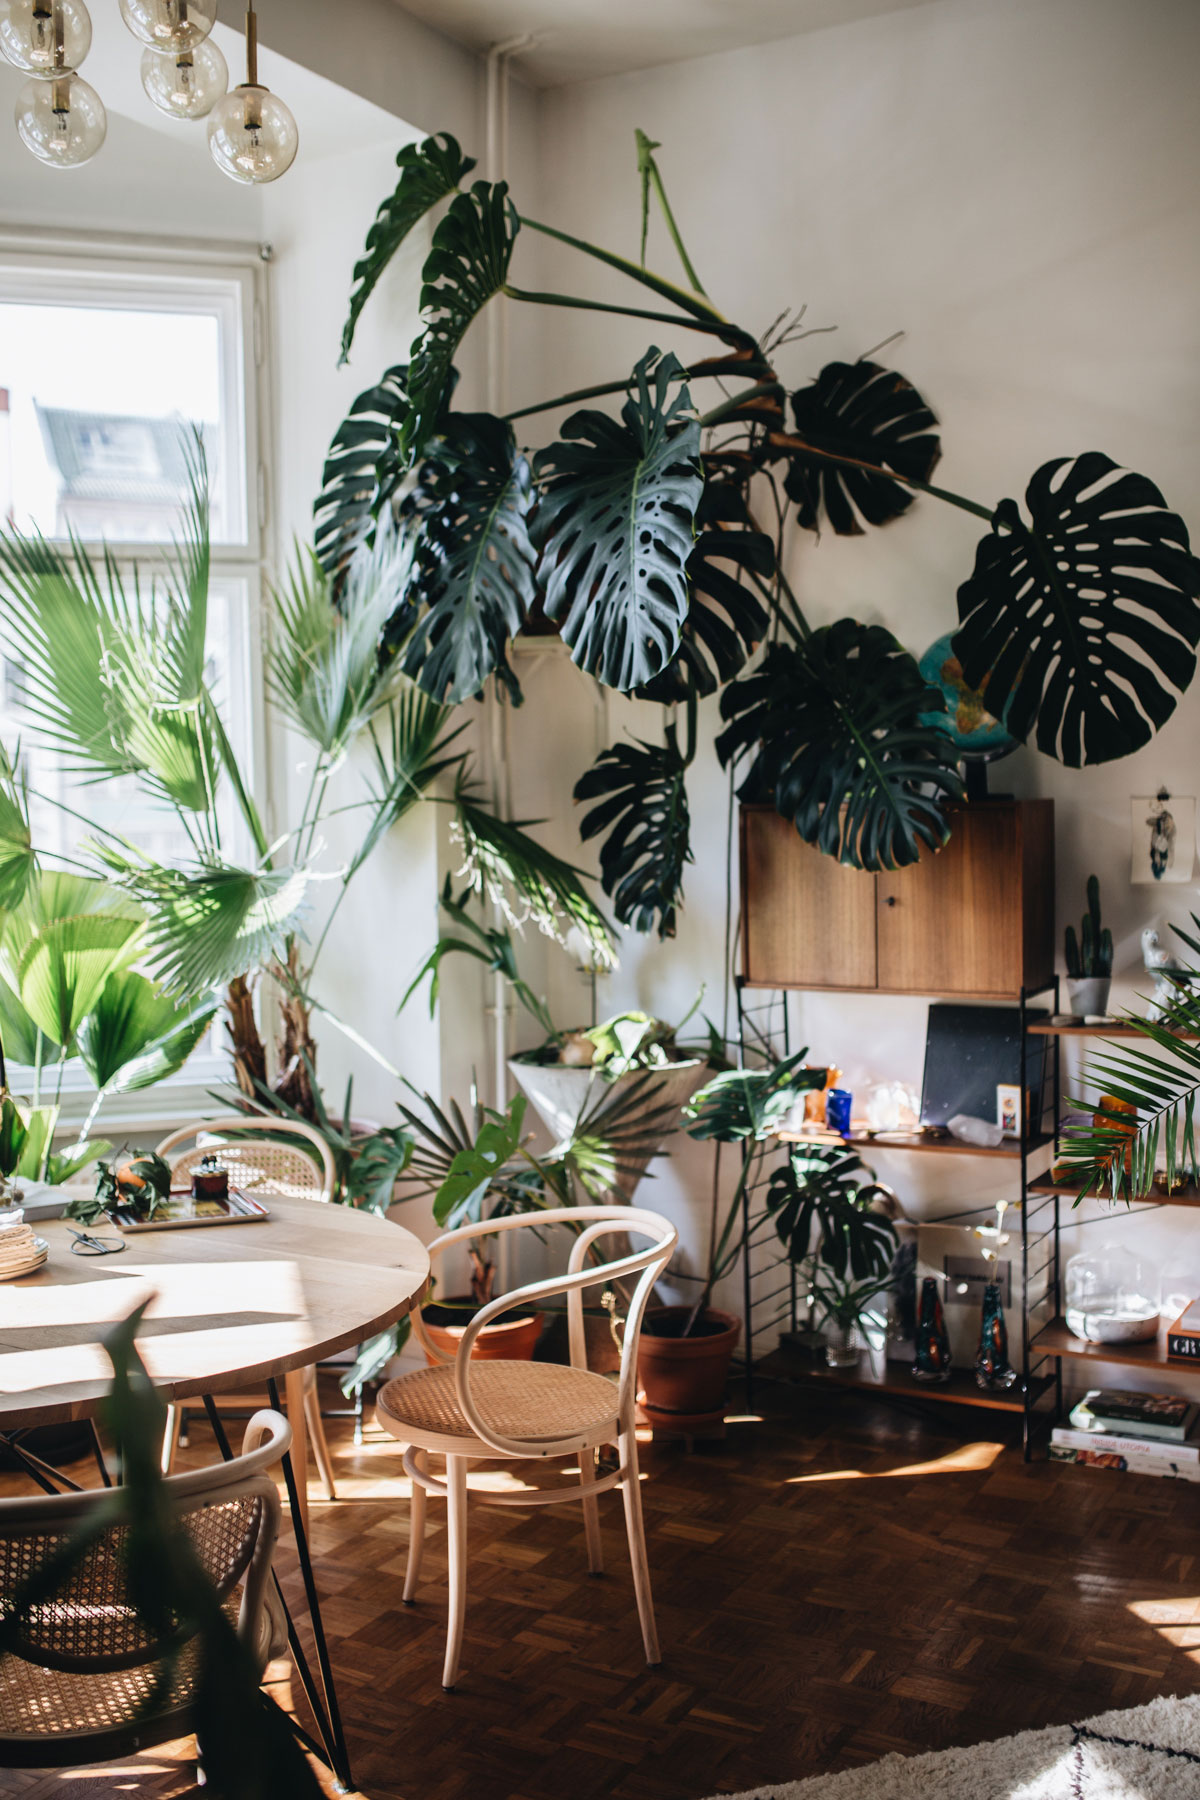 PLANT TRIBE LIVING HAPPILY EVER AFTER WITH PLANTSBy Igor Josifovic &amp; Judith de Graaff
Photo: The home of Tim Labenda In Berlin.Photography by Jules Villbrandt for Urban Jungle Bloggers.